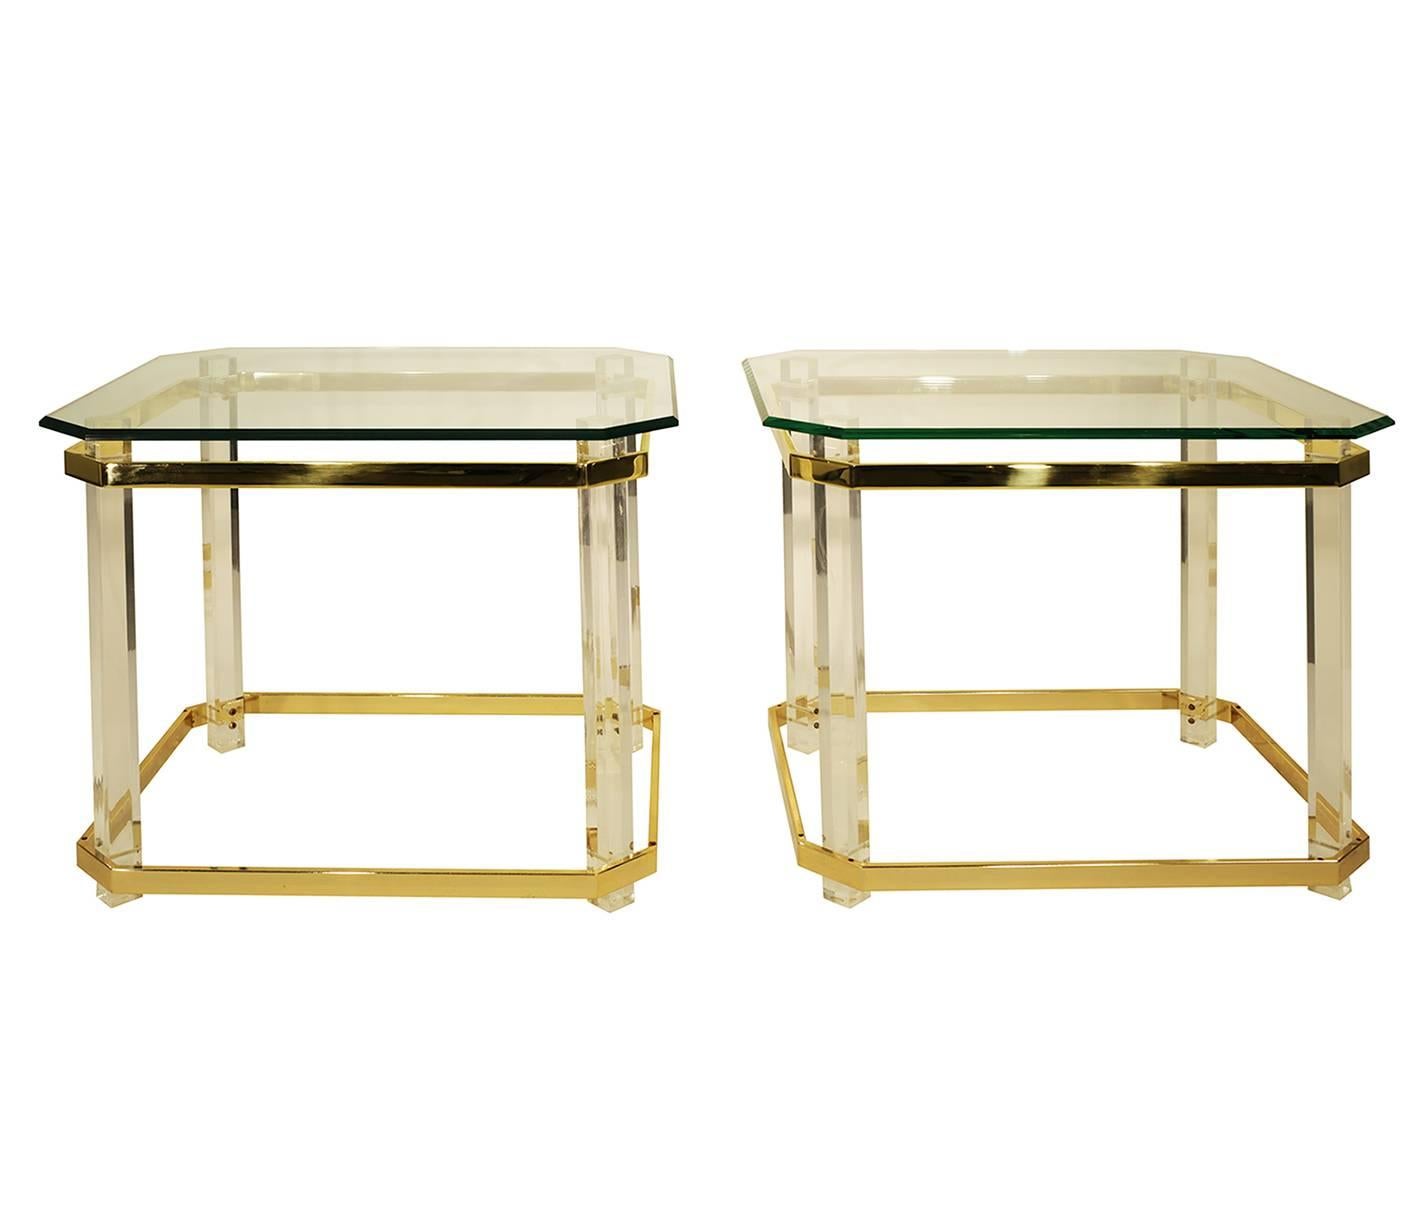 Pair of Charles Hollis Jones Lucite and brass, glass side tables. The tops have 